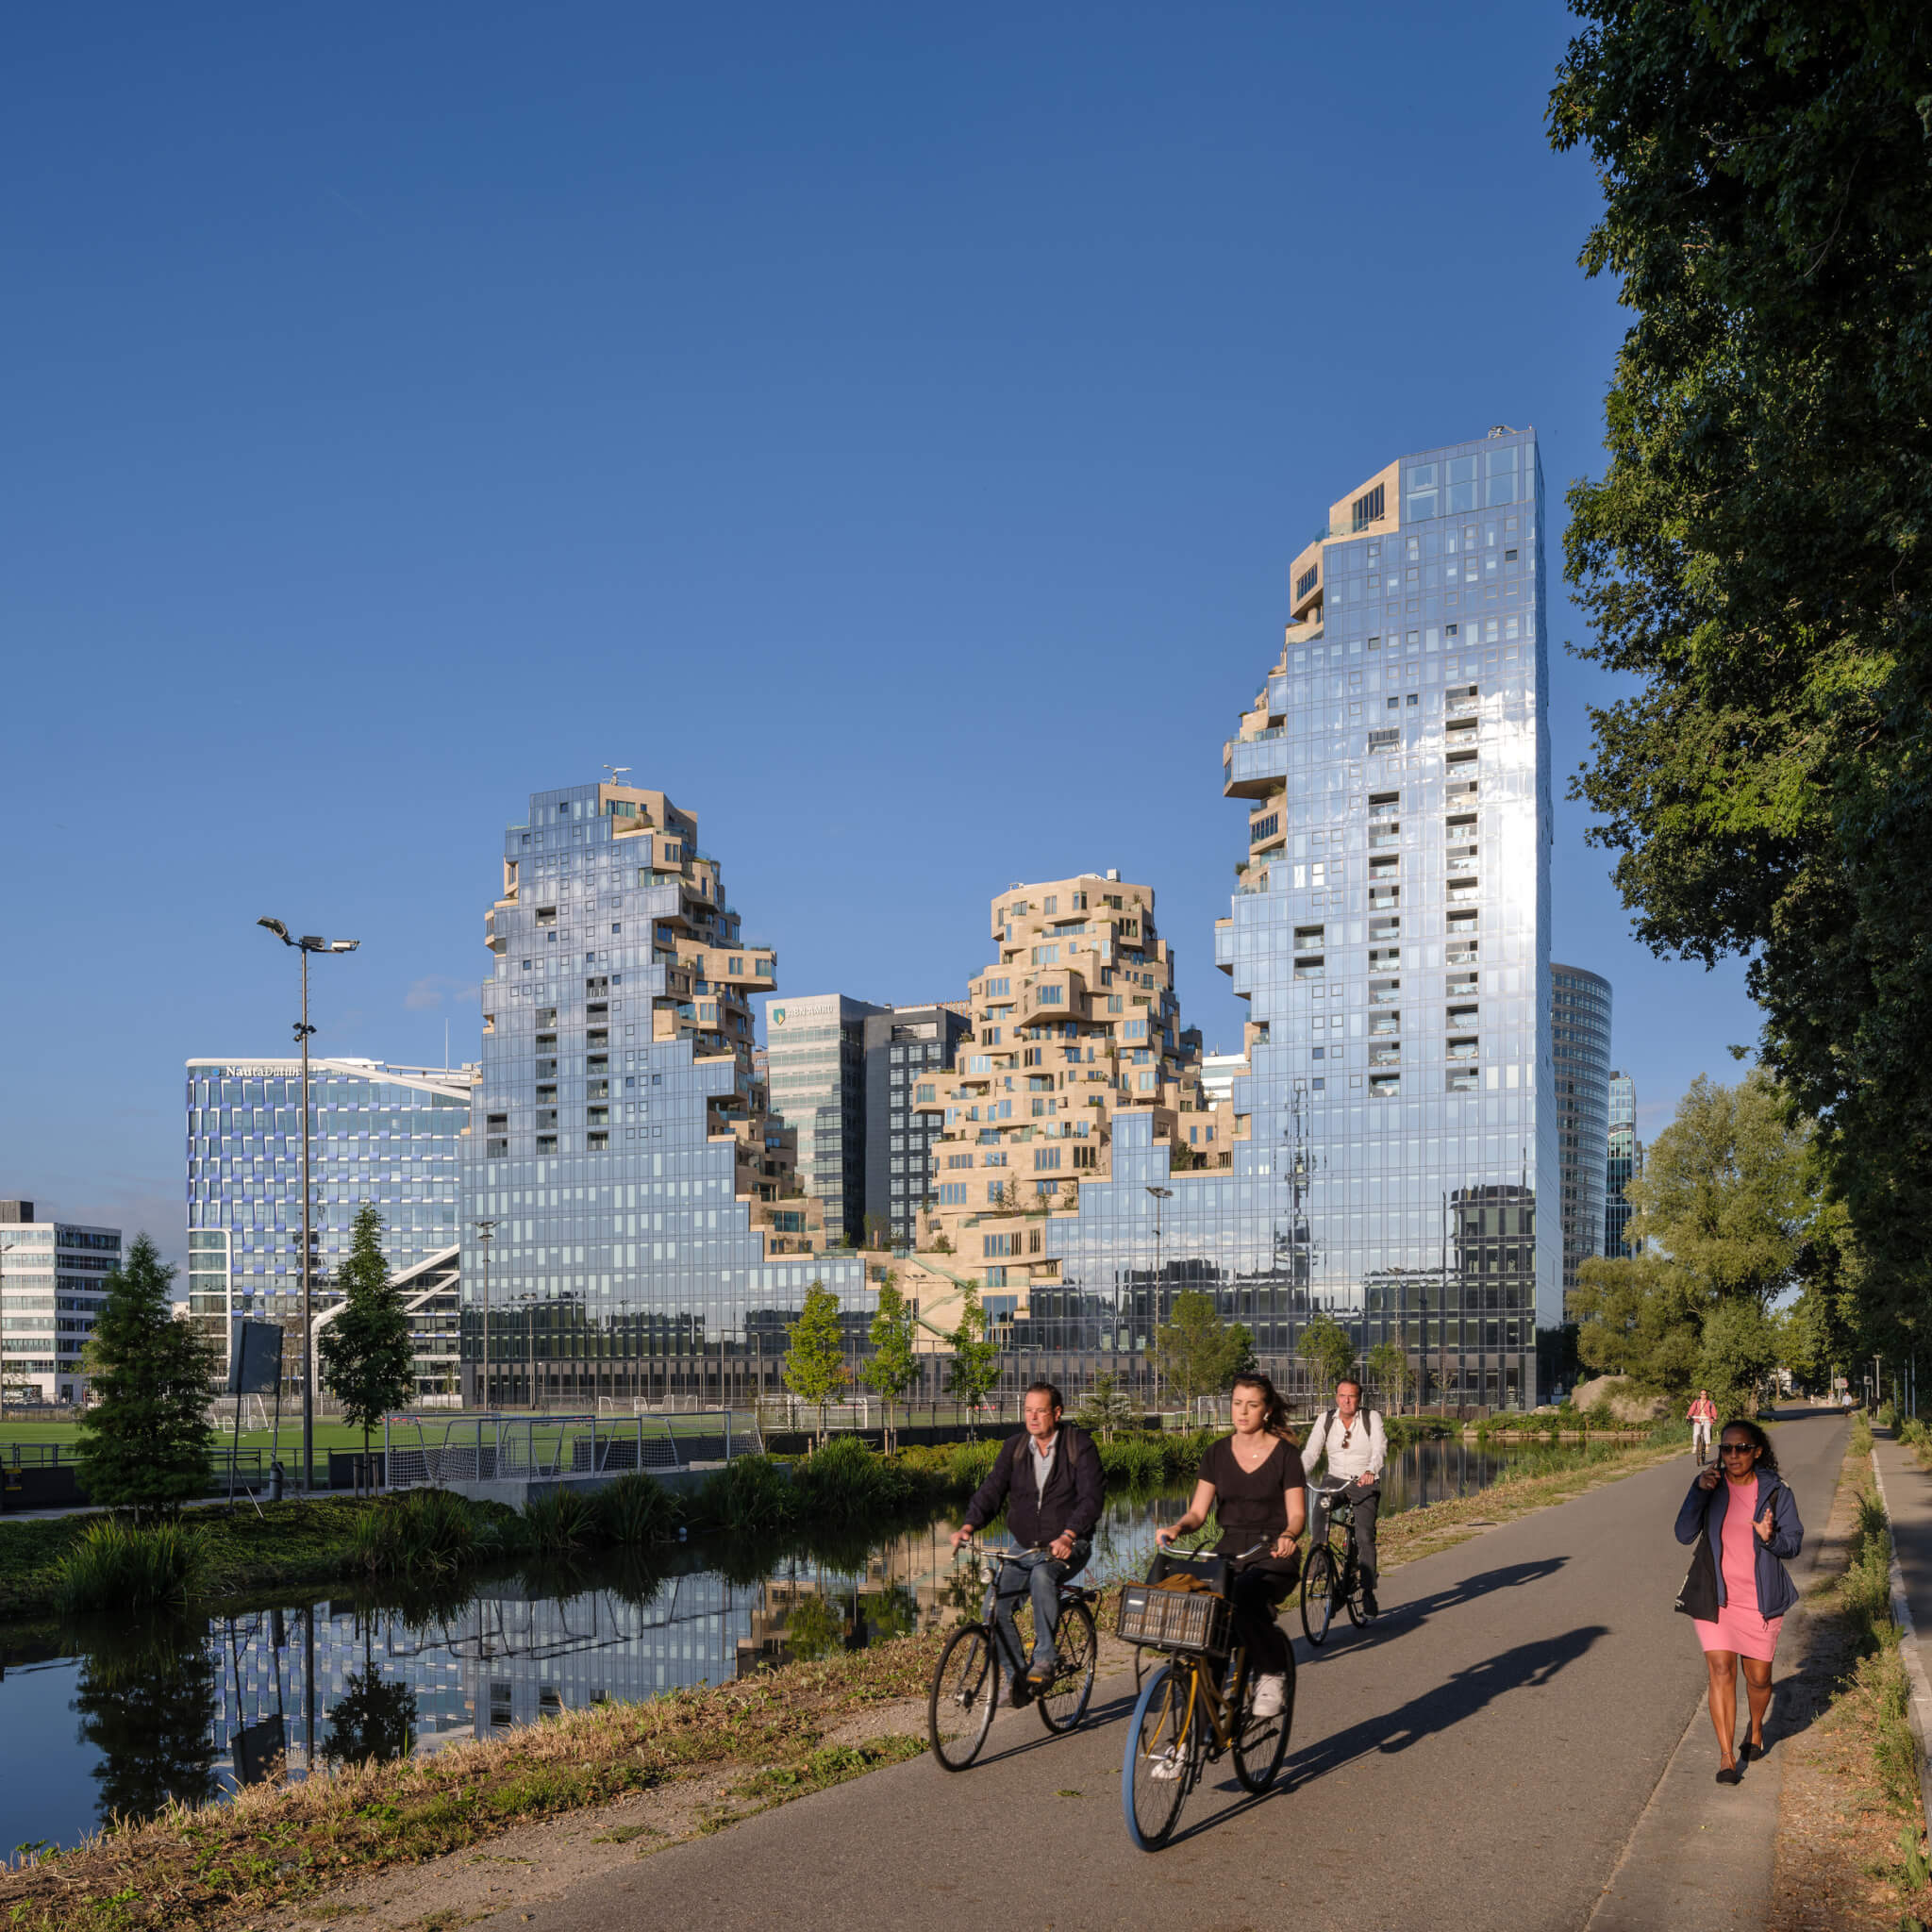 people bike near jagged towers clad in reflective glass